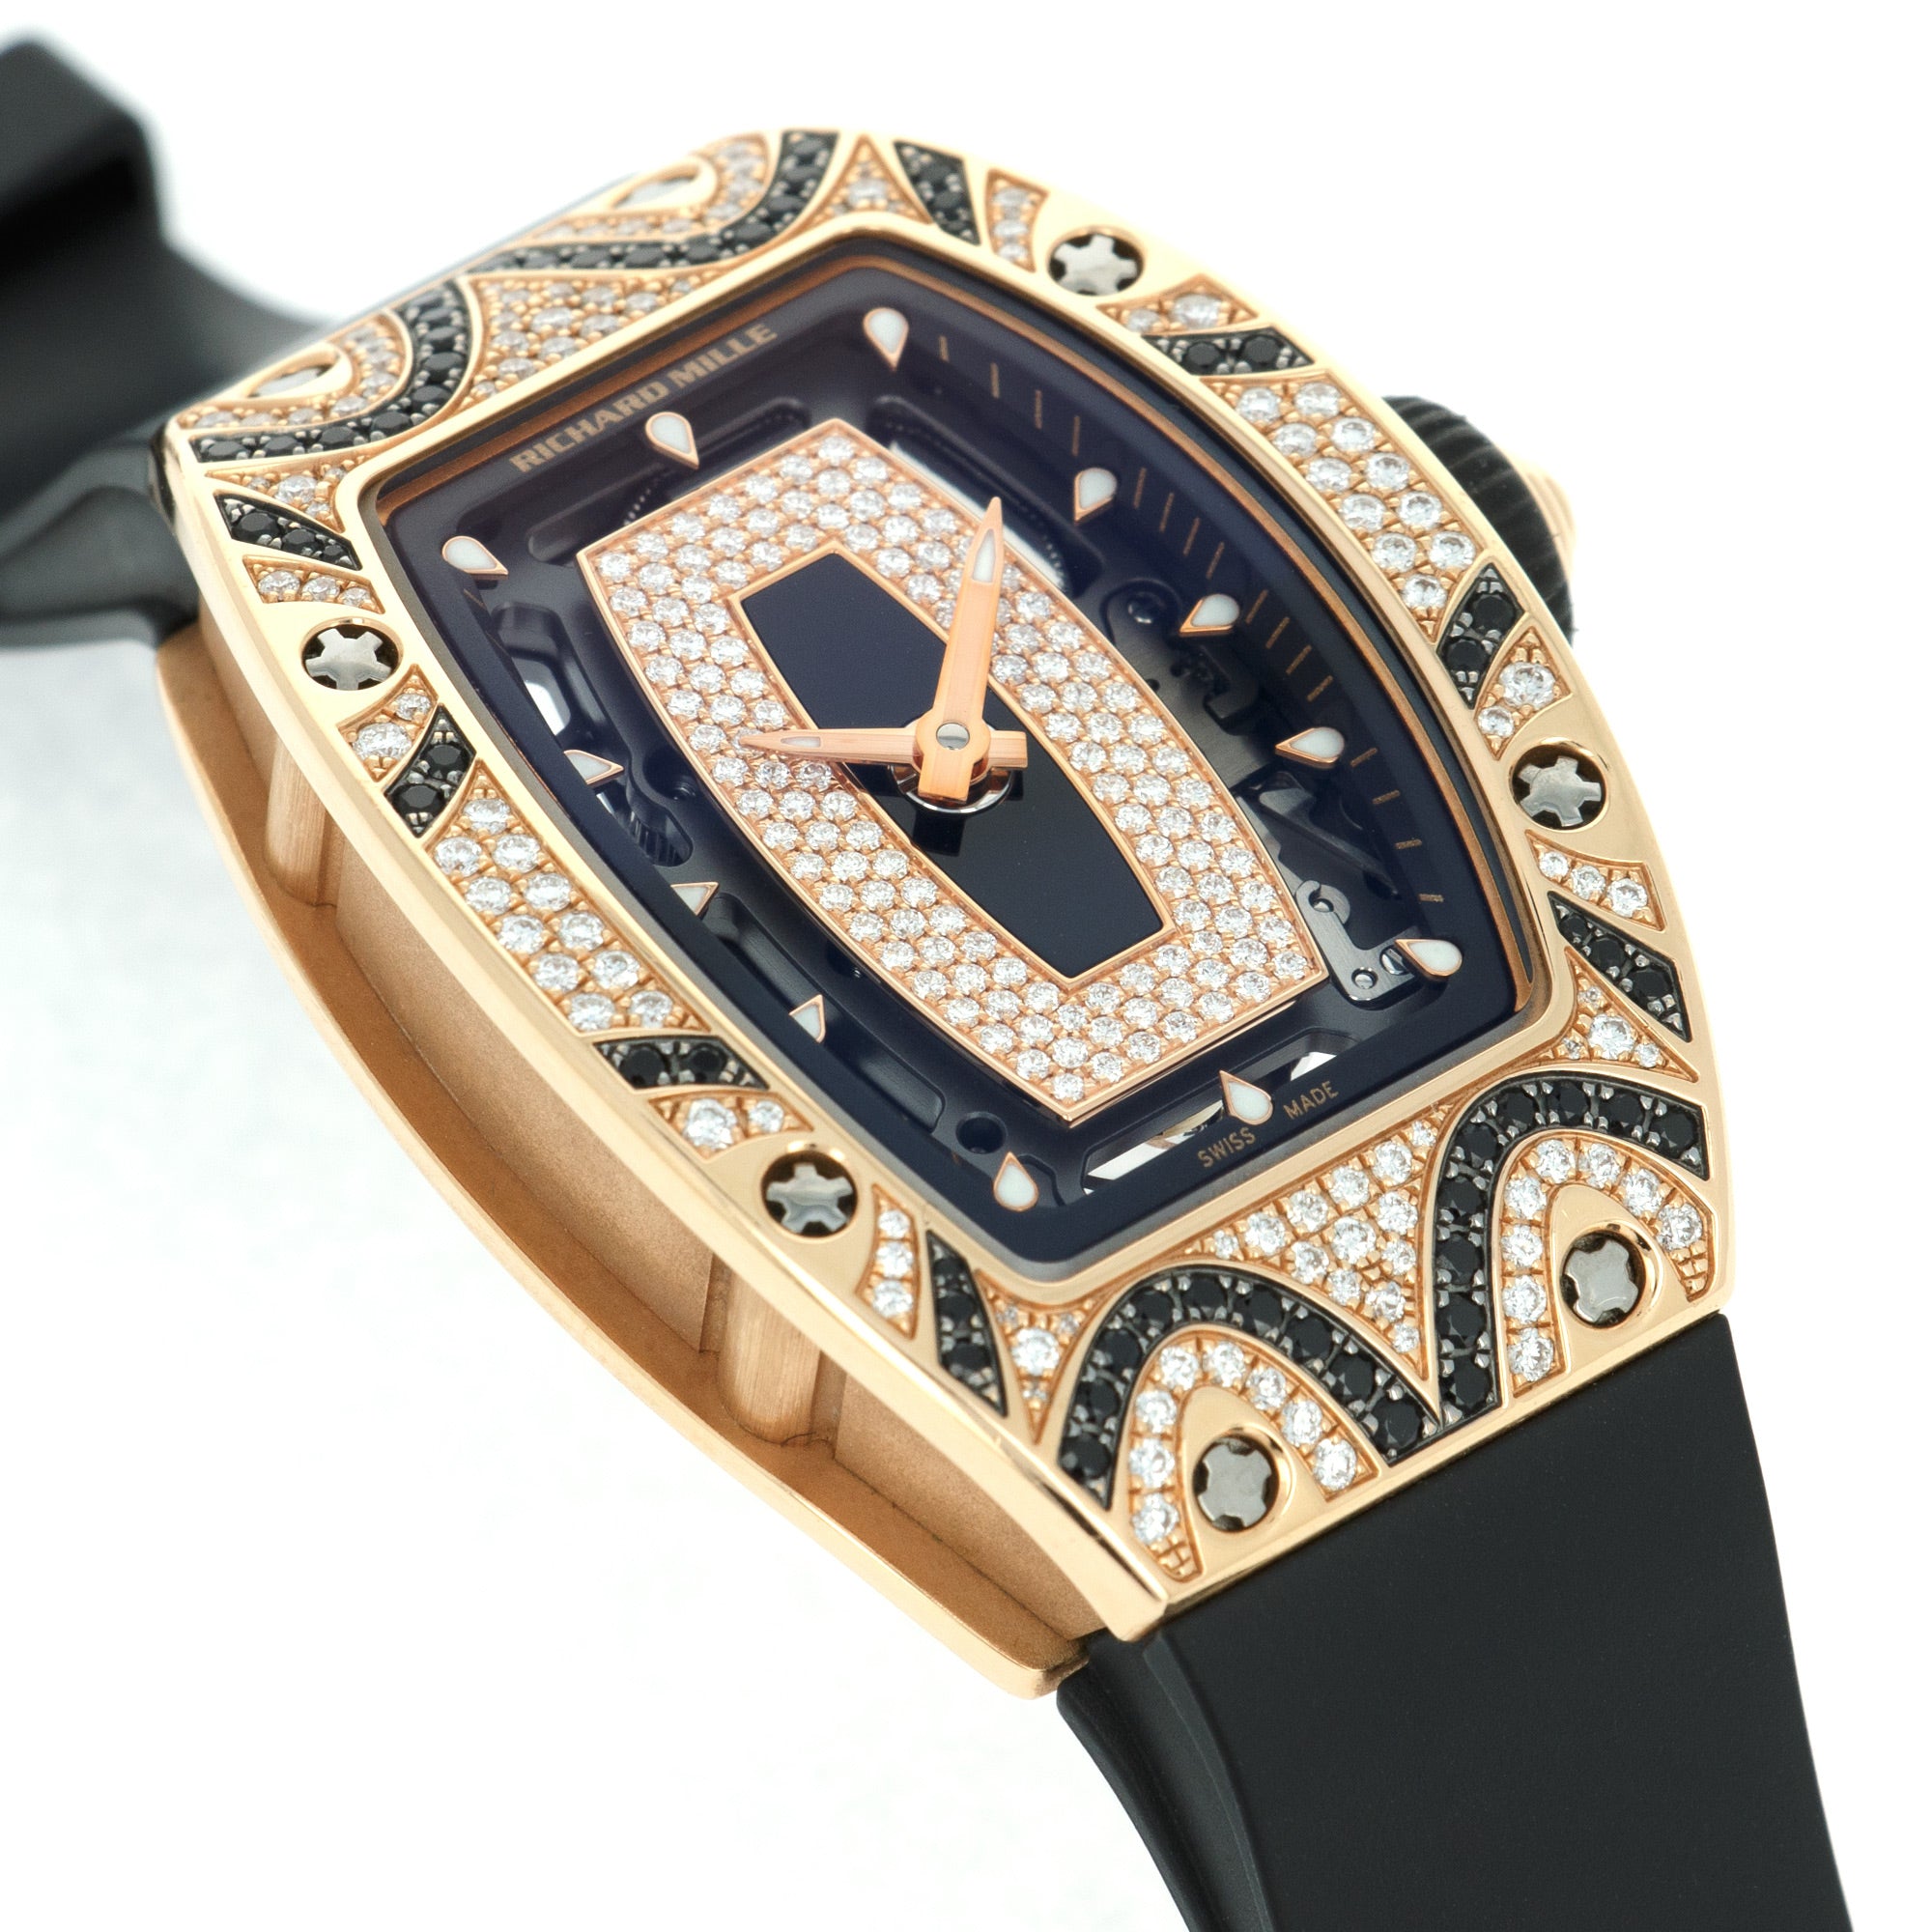 Richard Mille - Richard Mille Rose Gold Automatic RM07 - The Keystone Watches